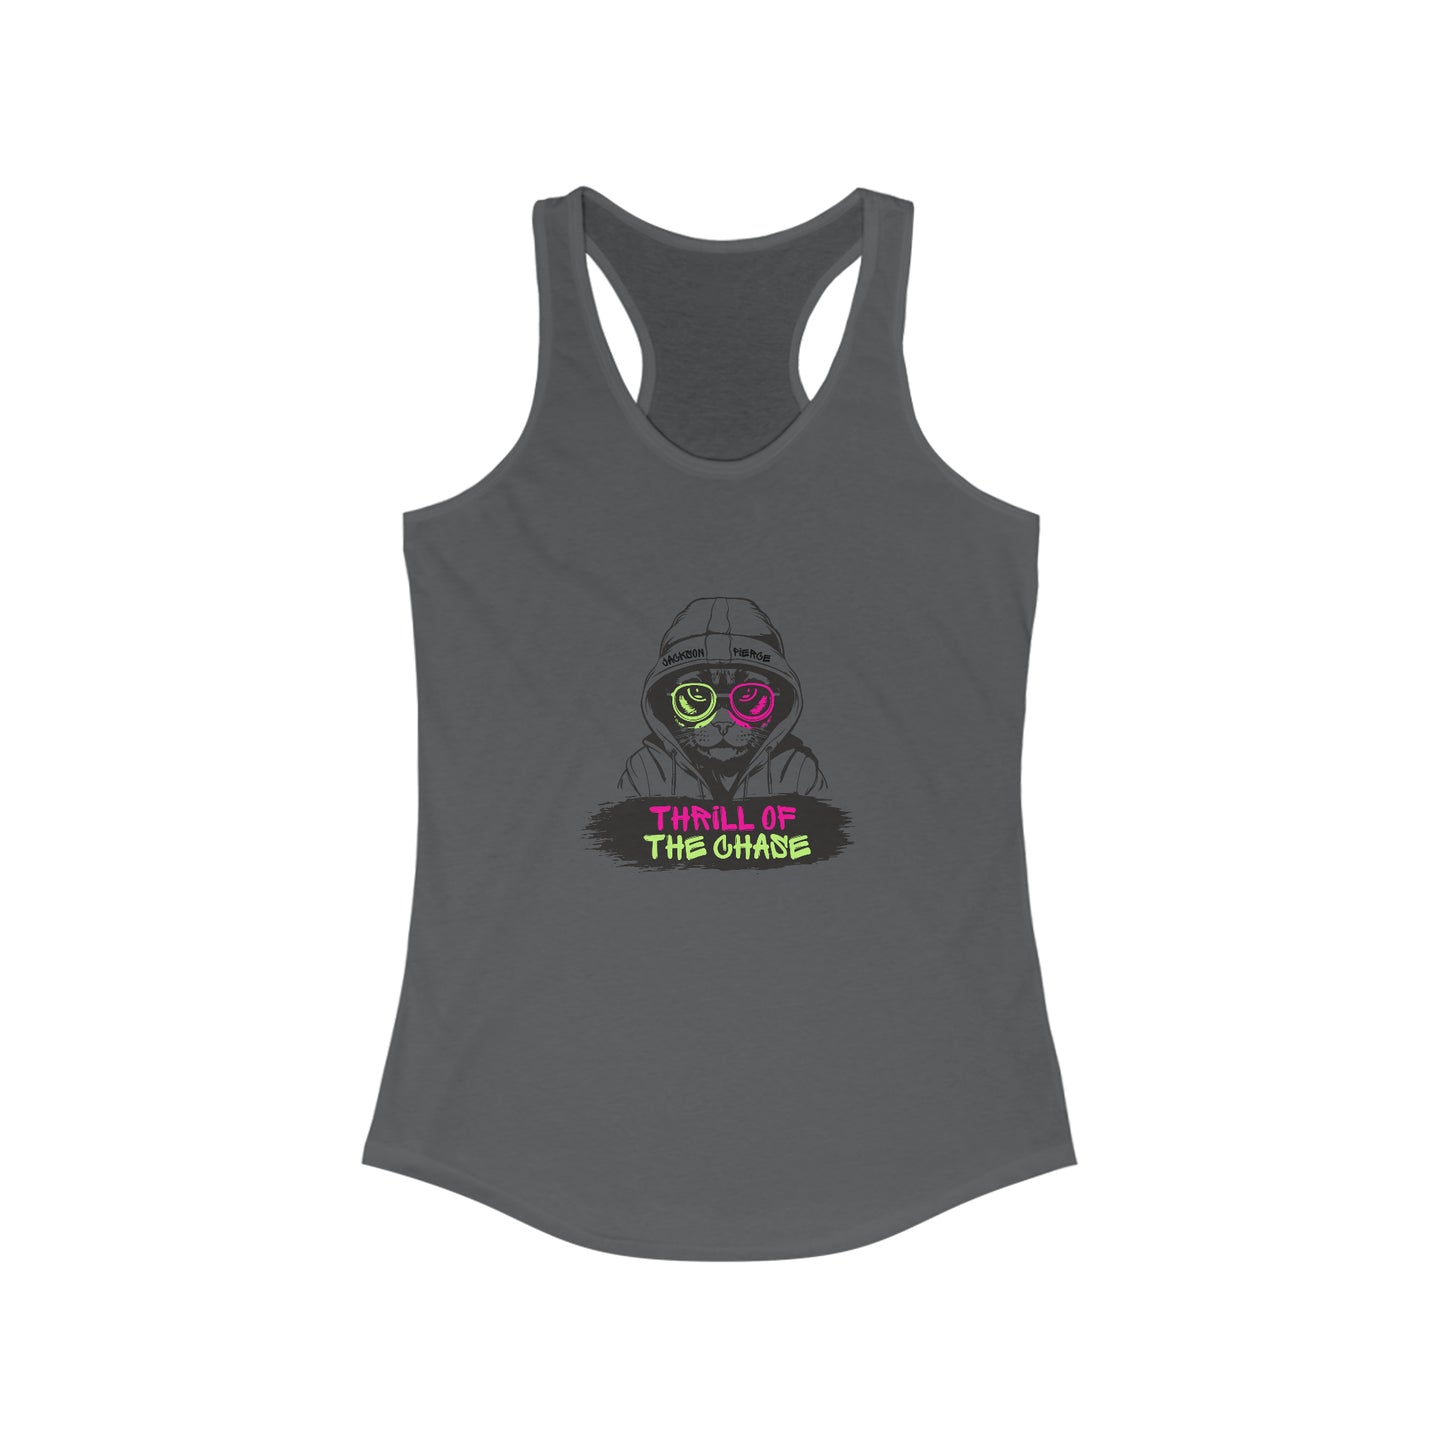 'Thrill of the Chase' Women's Ideal Racerback Tank